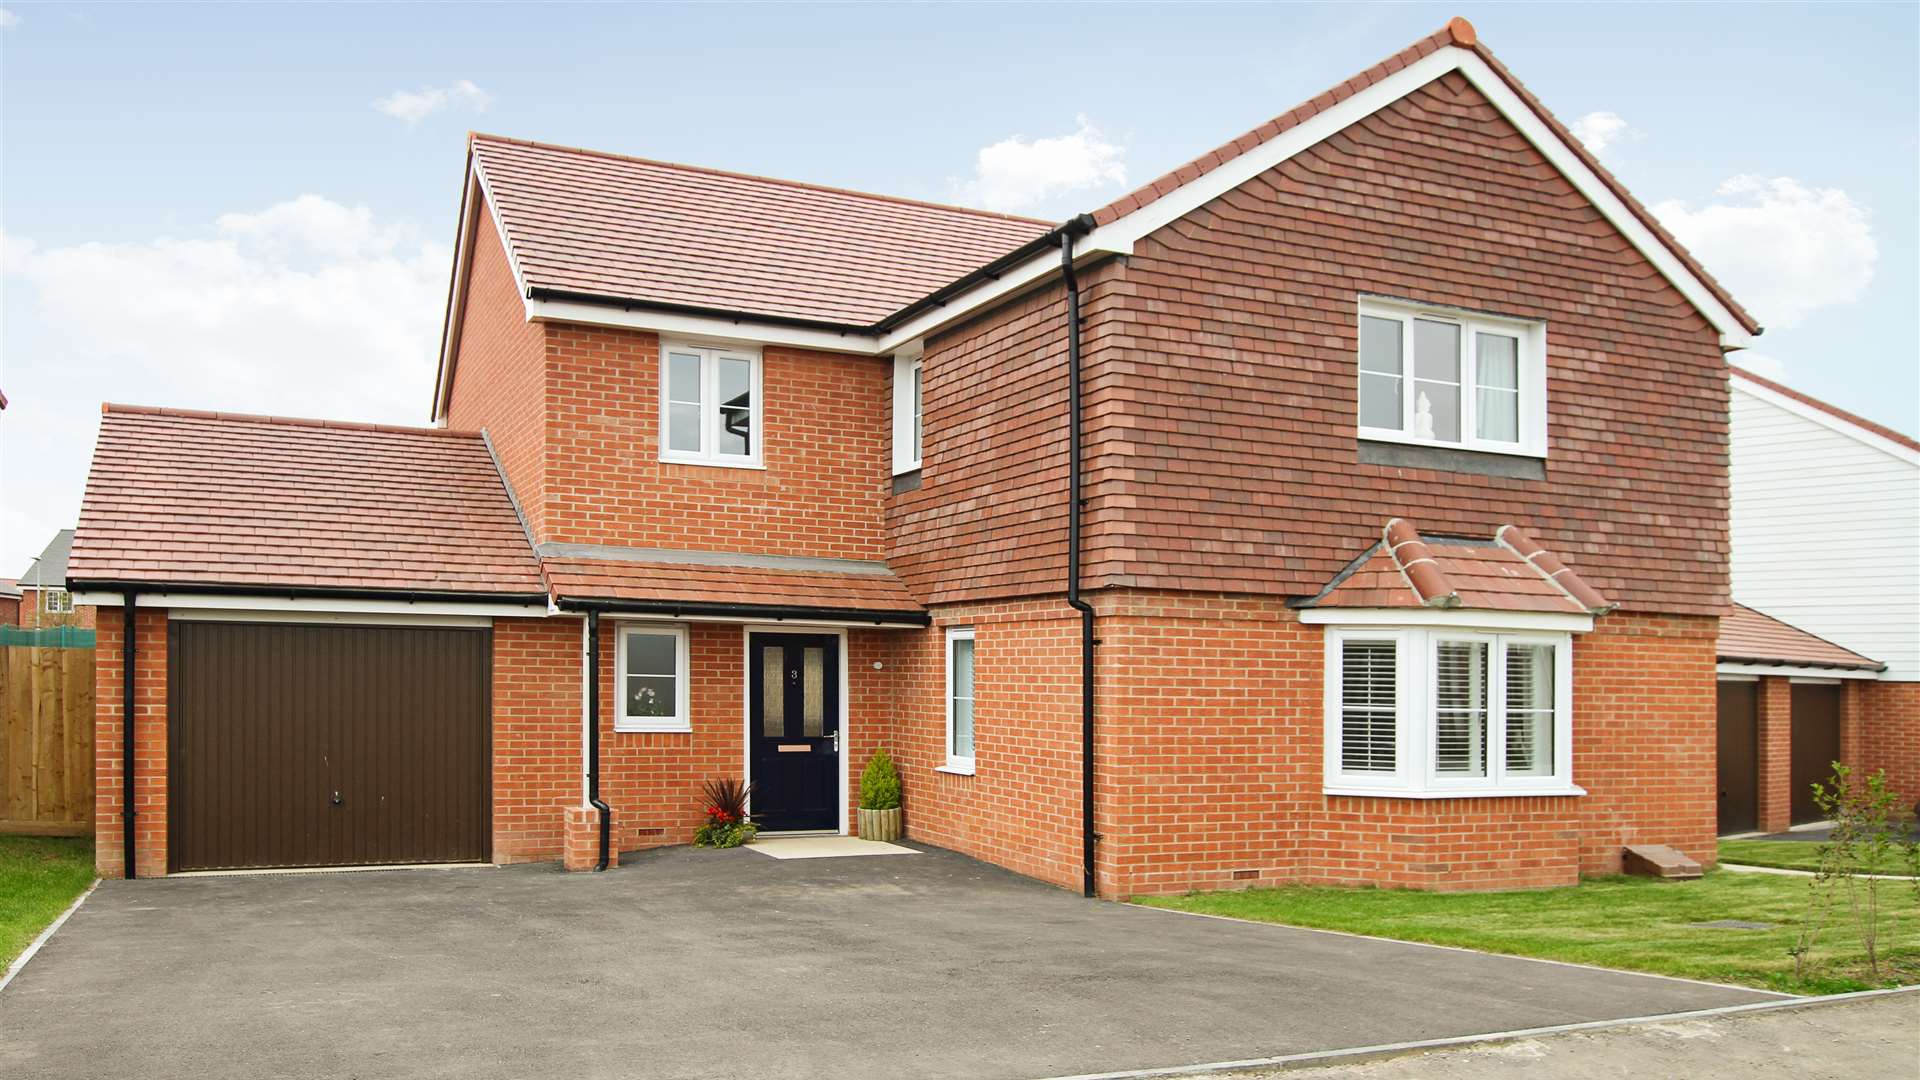 Persimmon has a development at Timperley Place in Deal